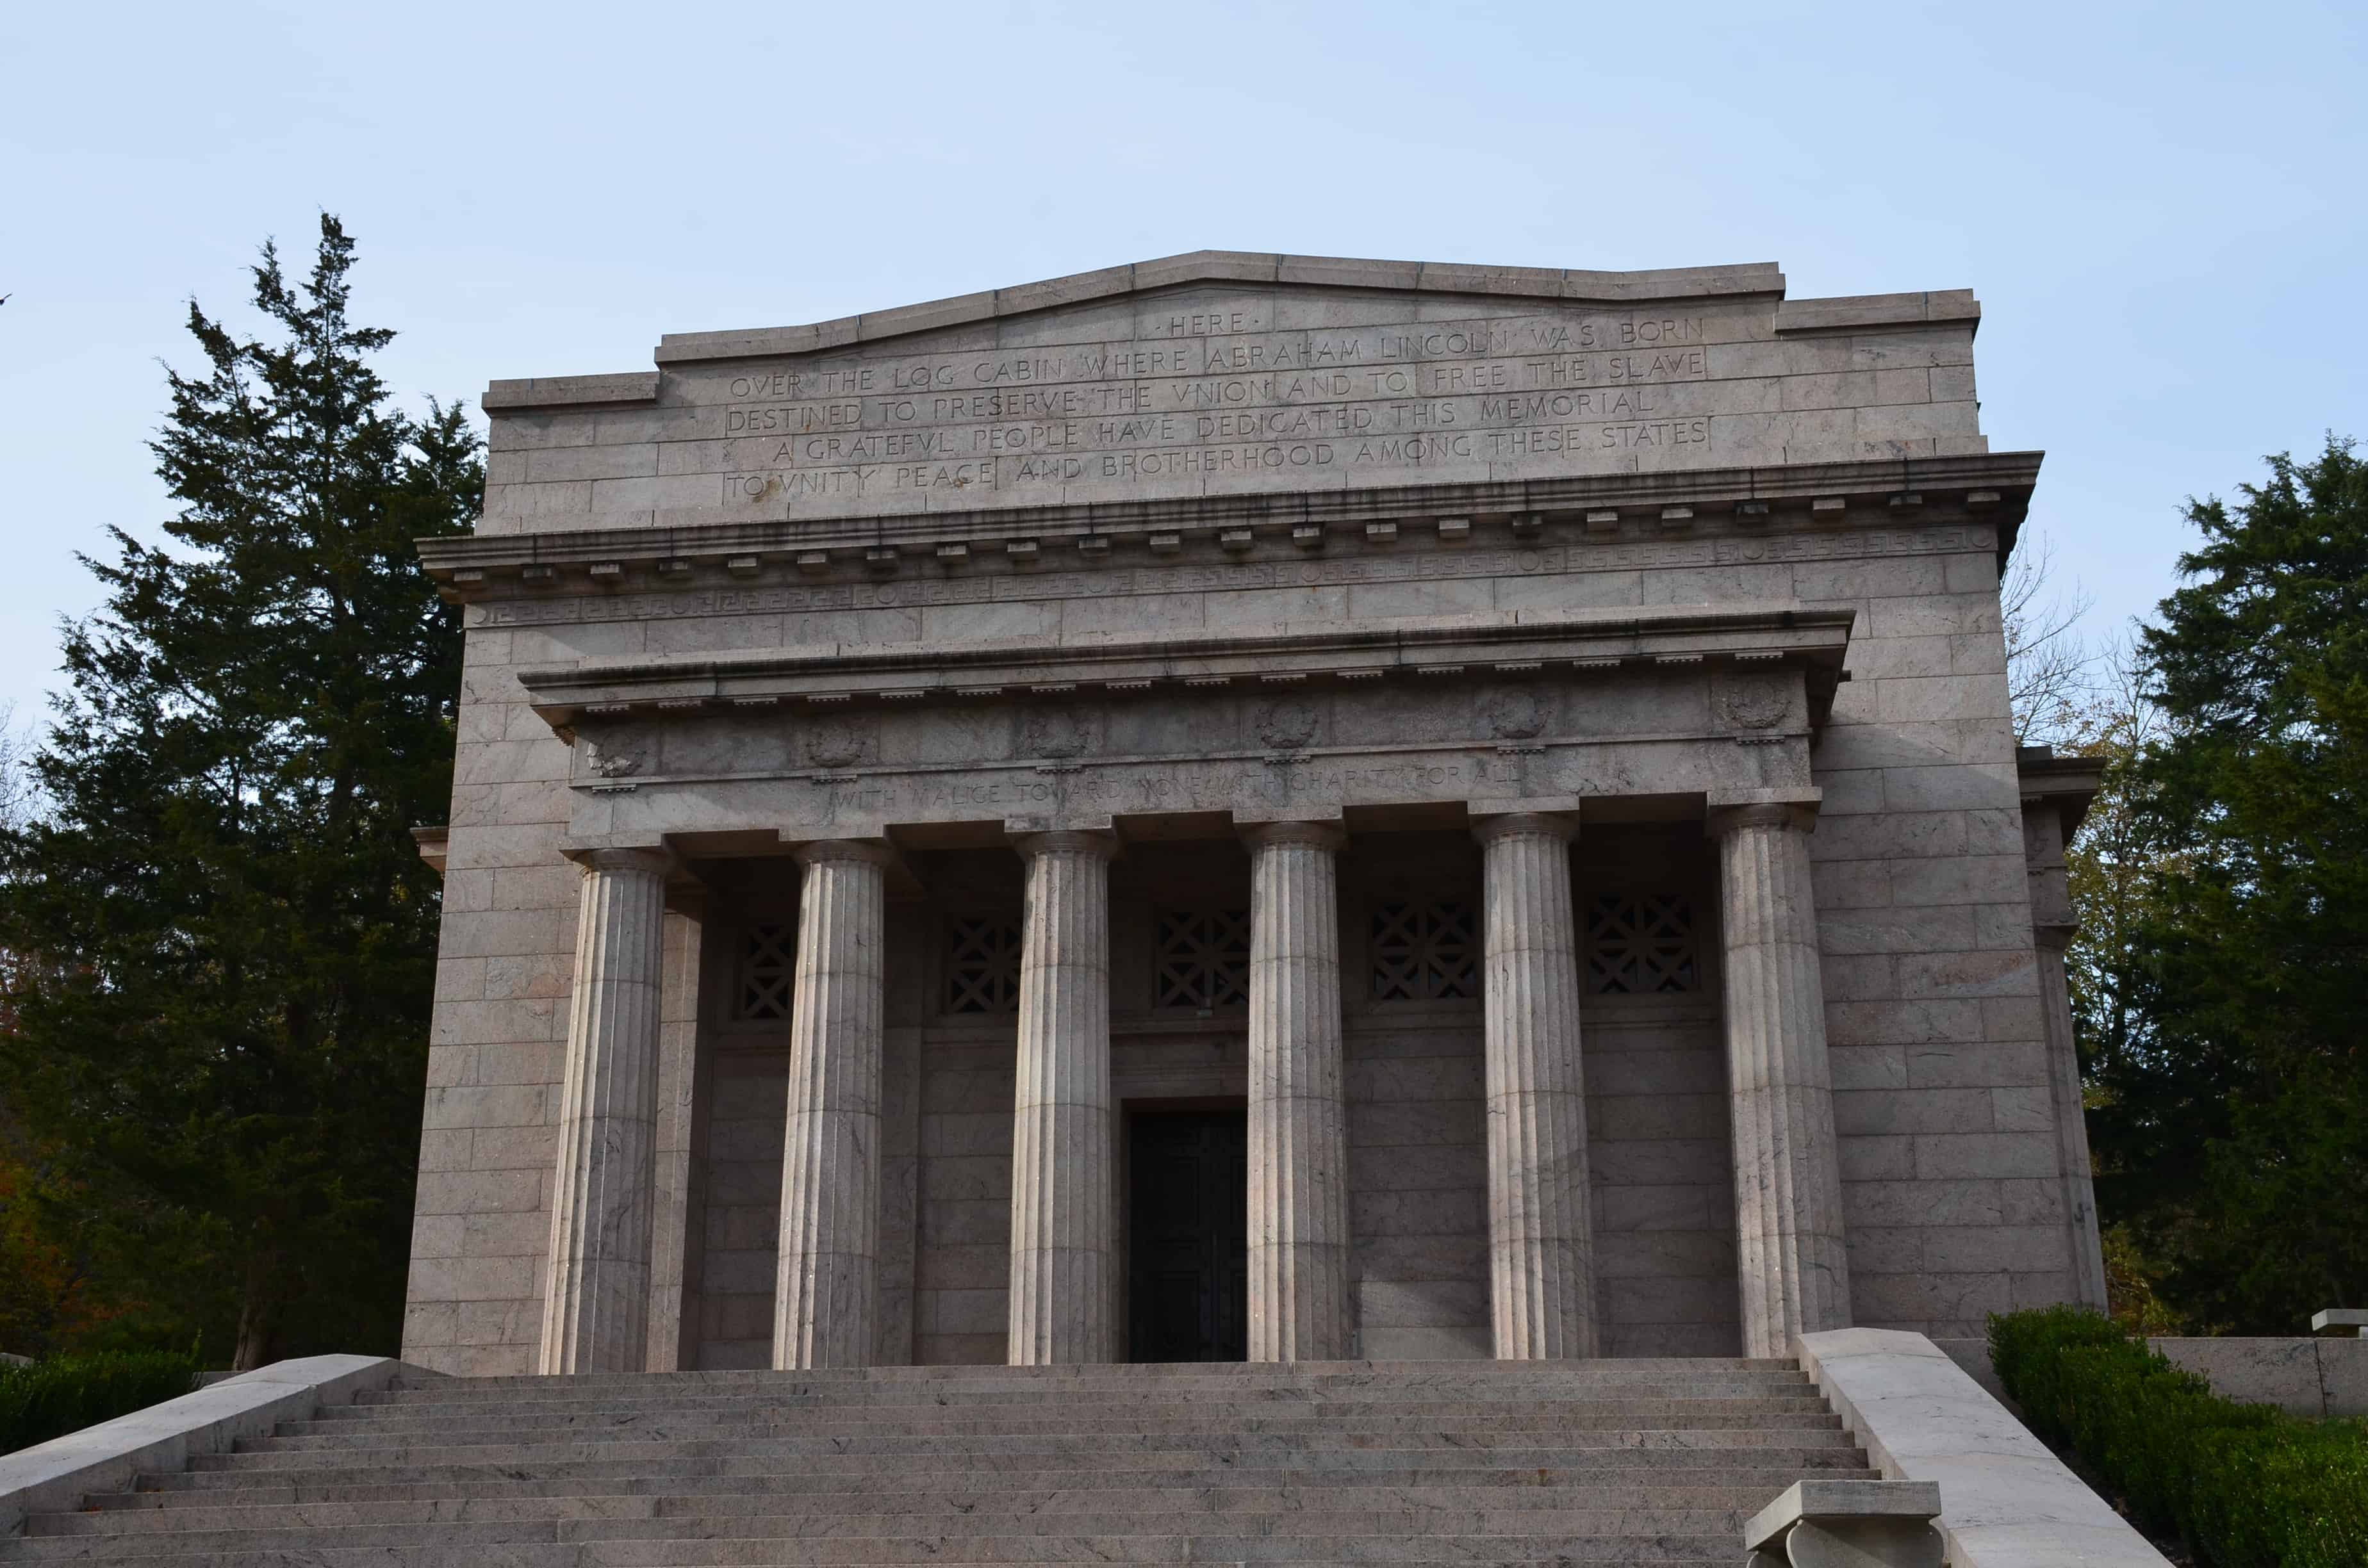 Memorial Building at Abraham Lincoln Birthplace National Historical Park in Kentucky